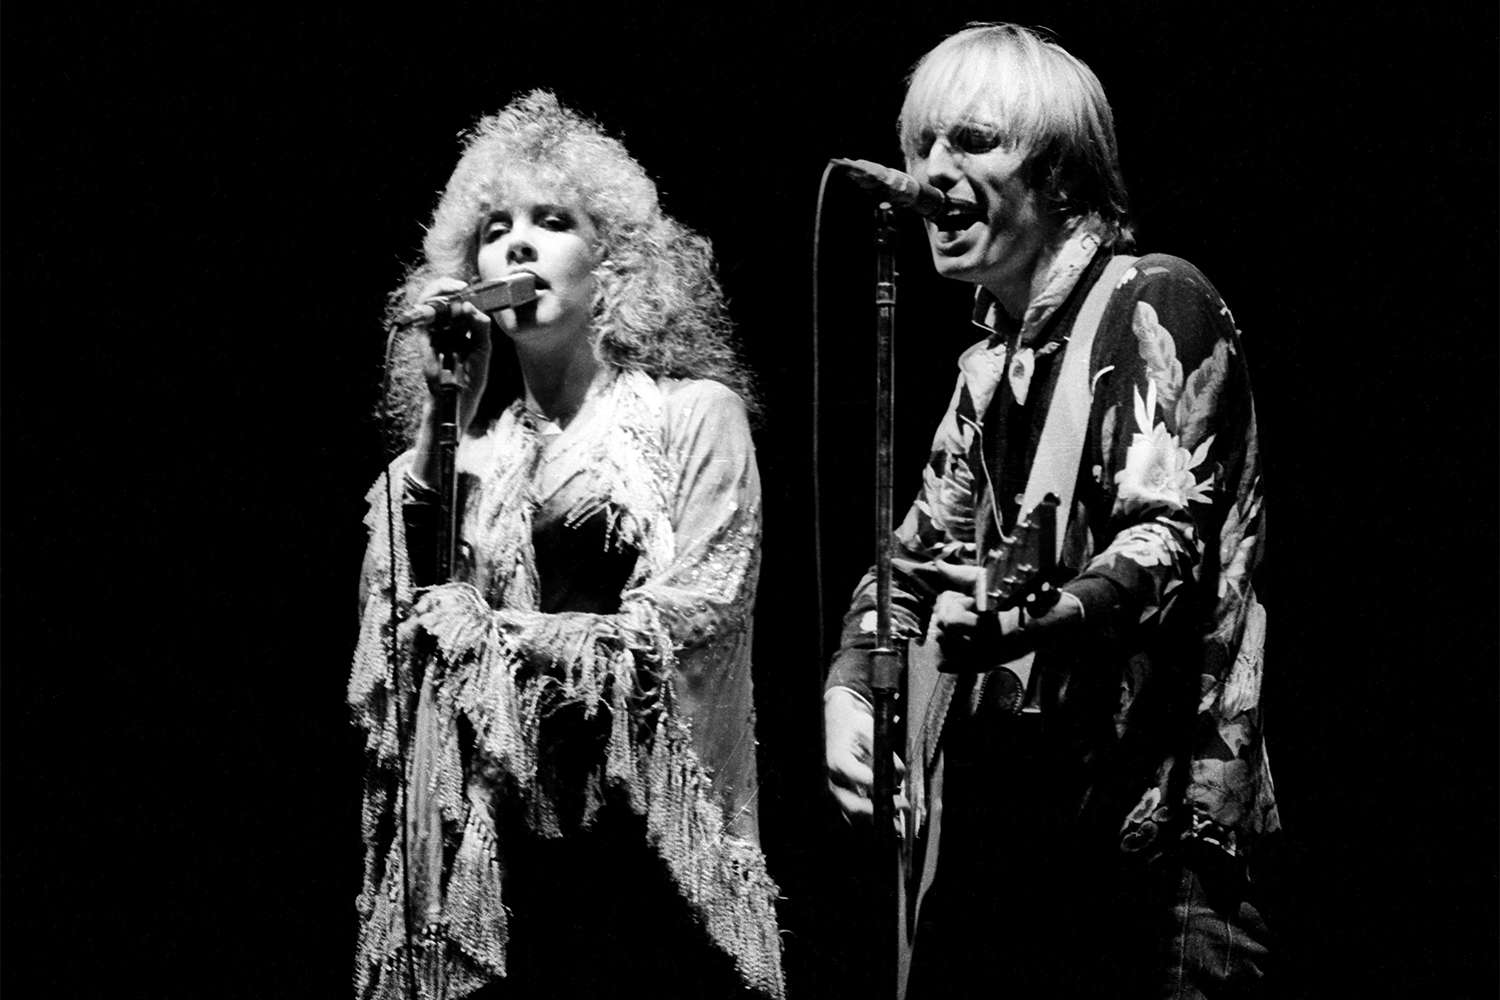 Stevie Nicks and Tom Petty perform together at the Cow Palace on June 26, 1981 in Daly City, California.